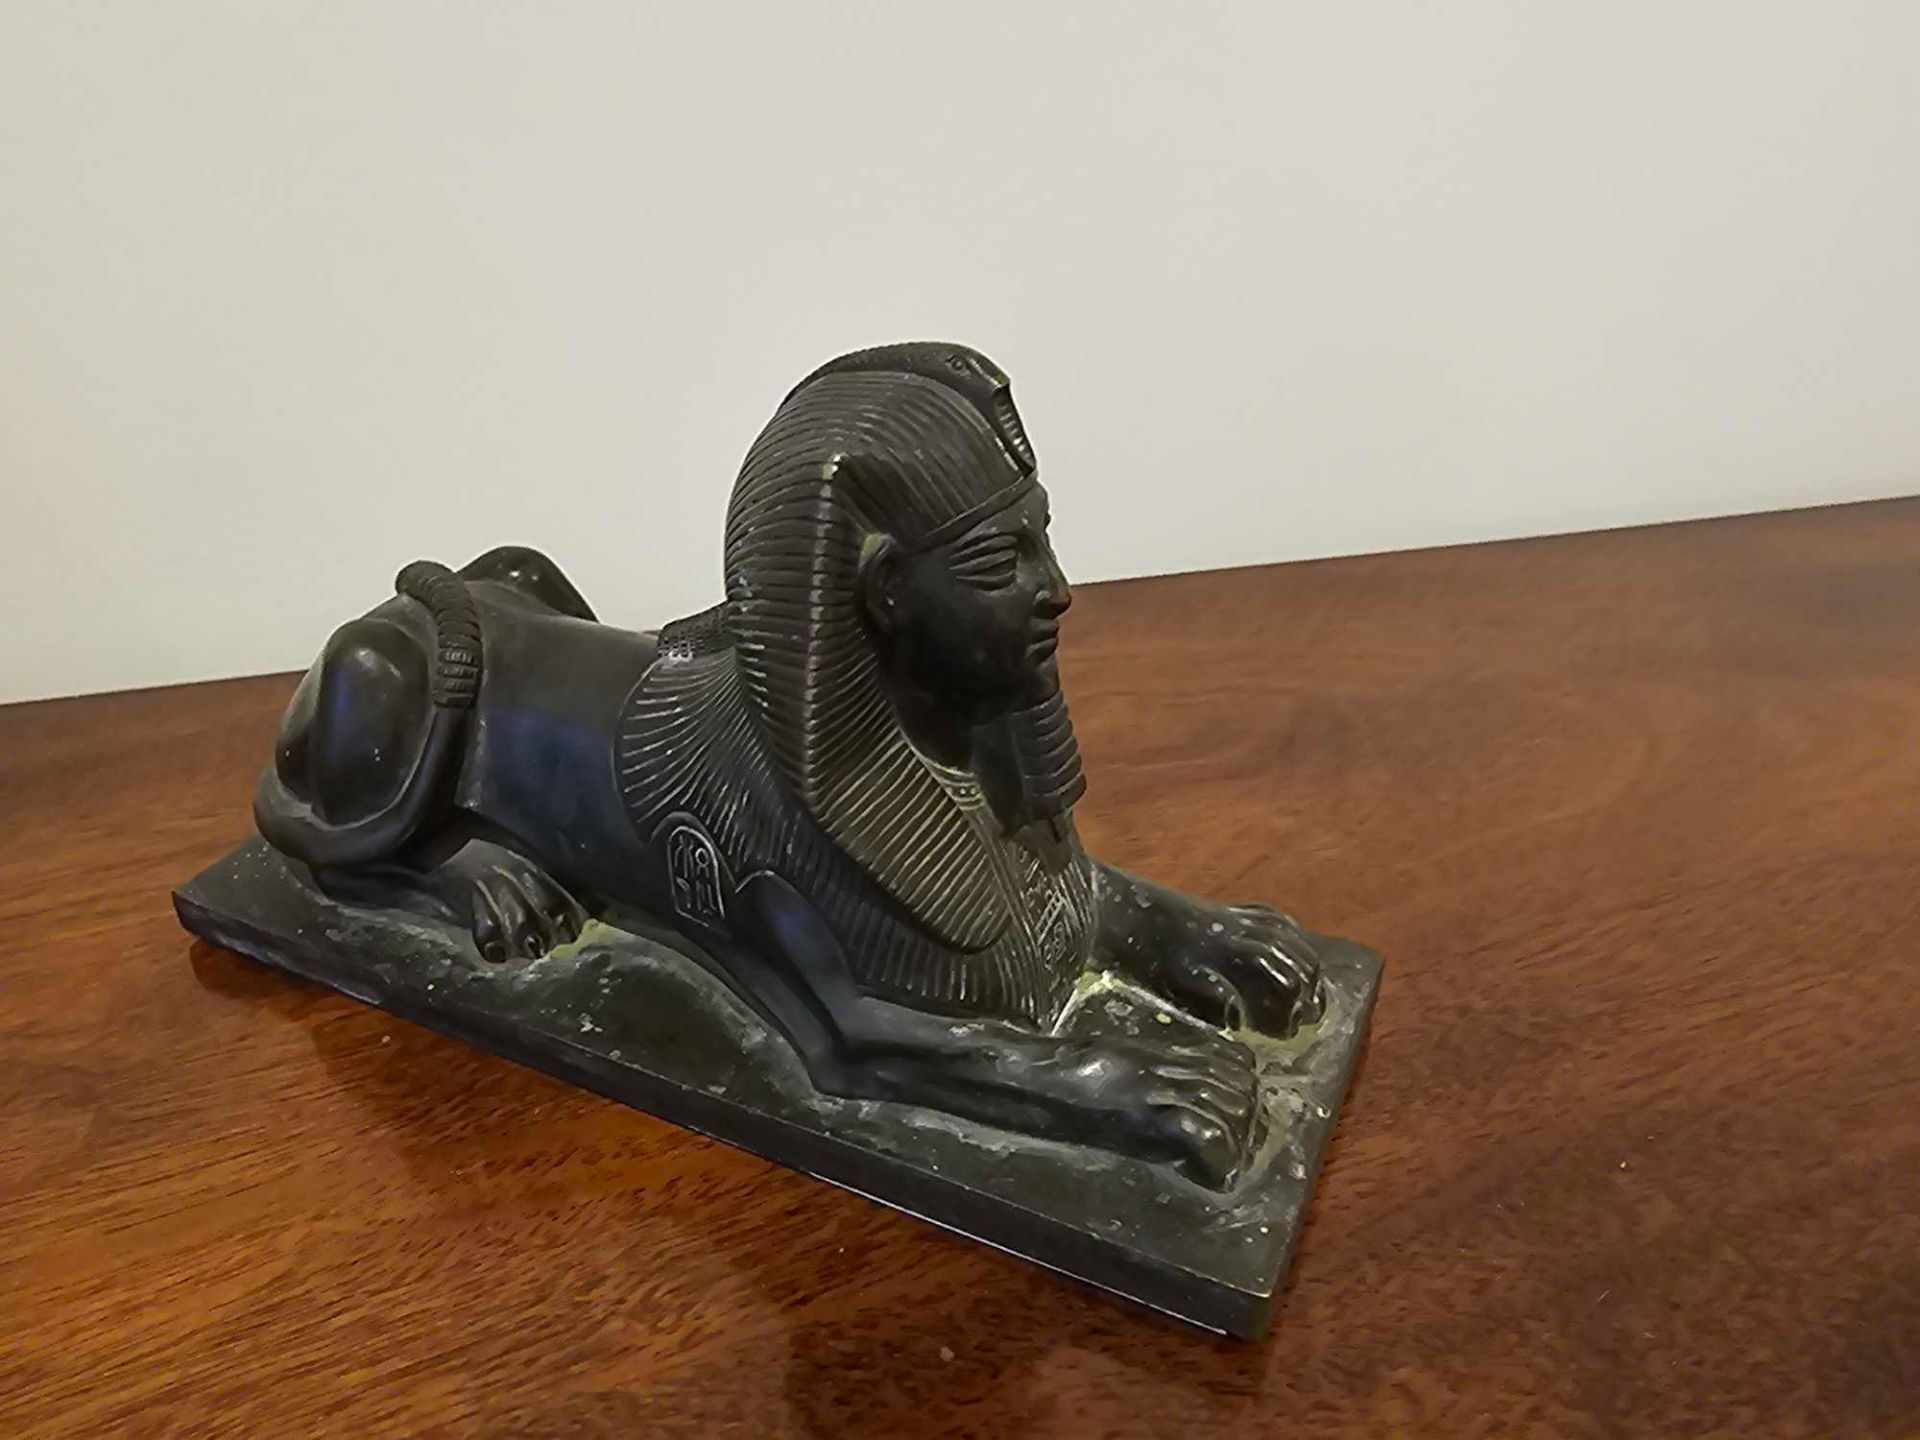 A Cold Cast Egyptian Sphinx Statue - Image 4 of 4